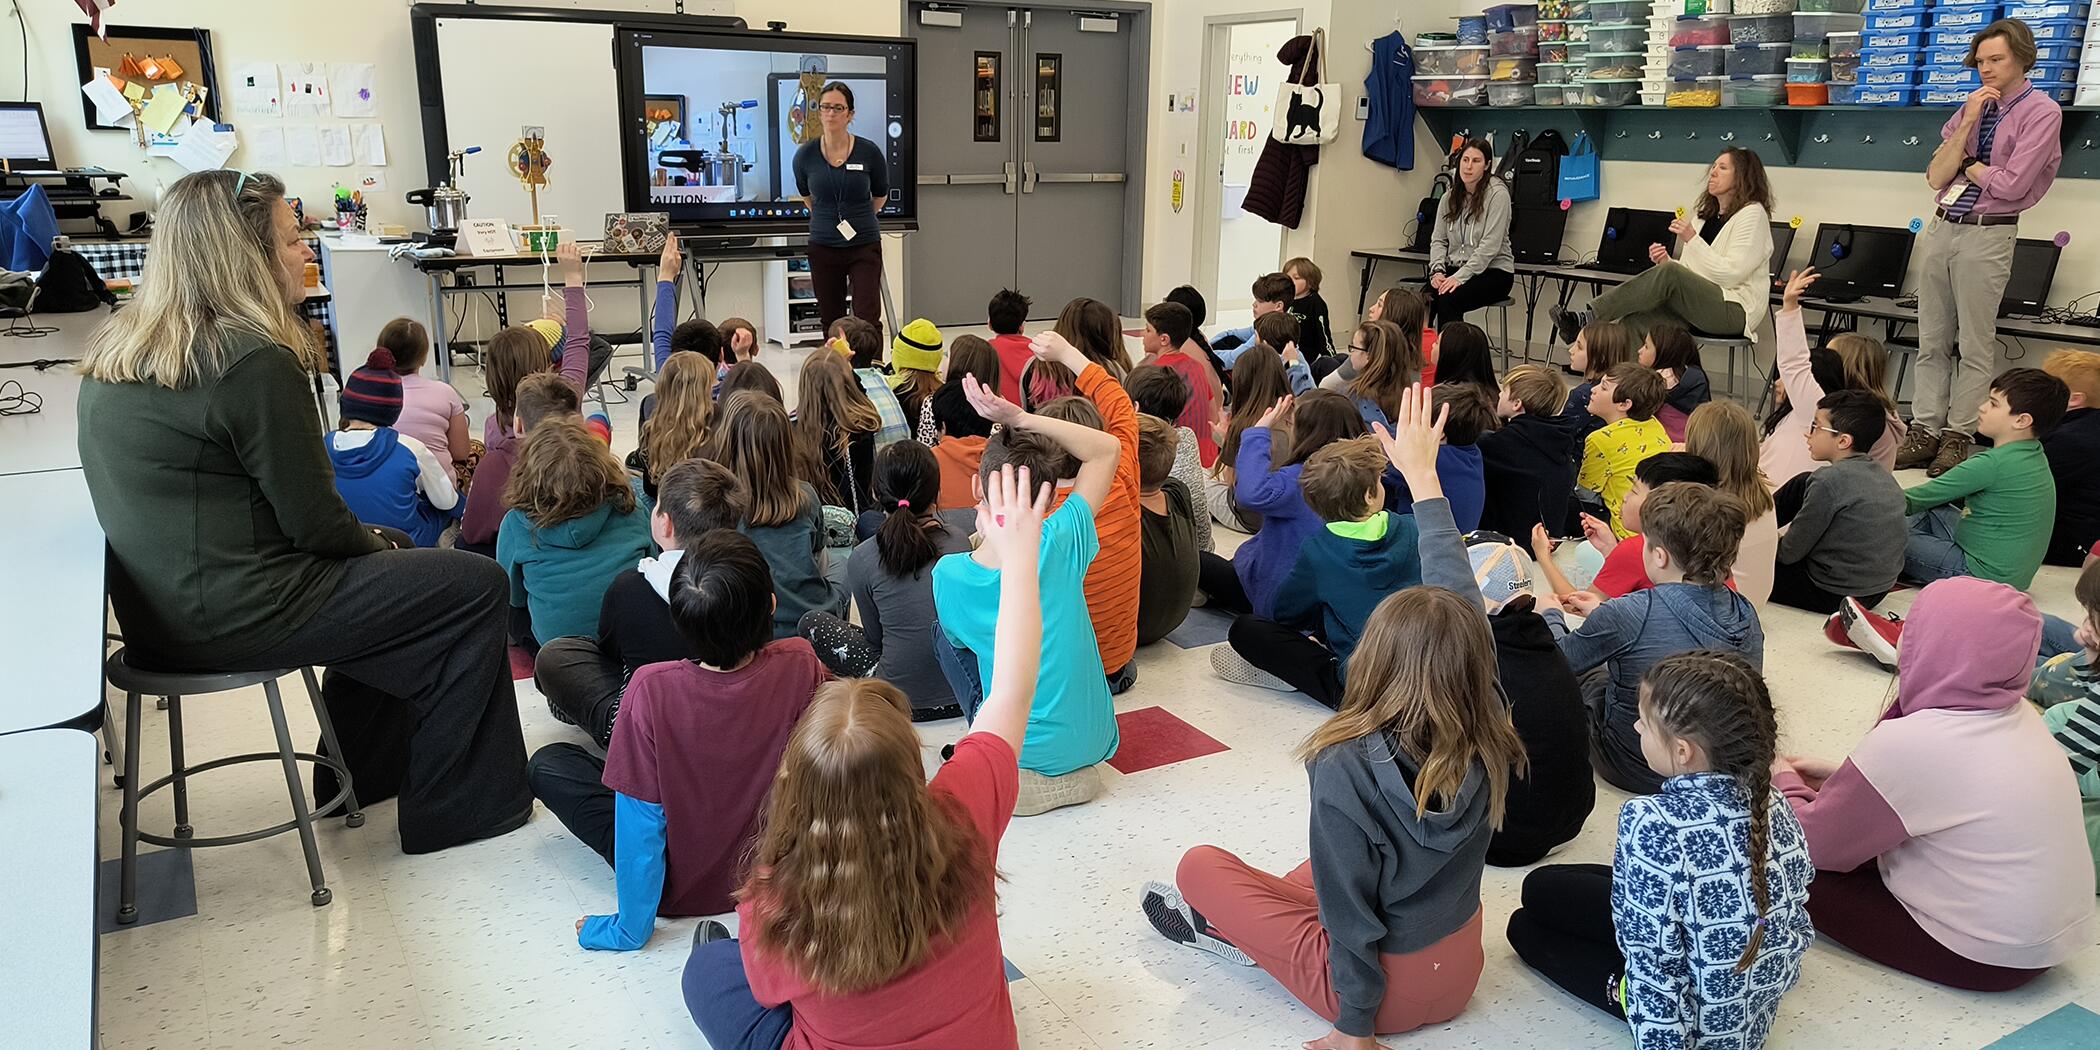 A photo of Mast Way's 4th grade students with raised hands in a classroom